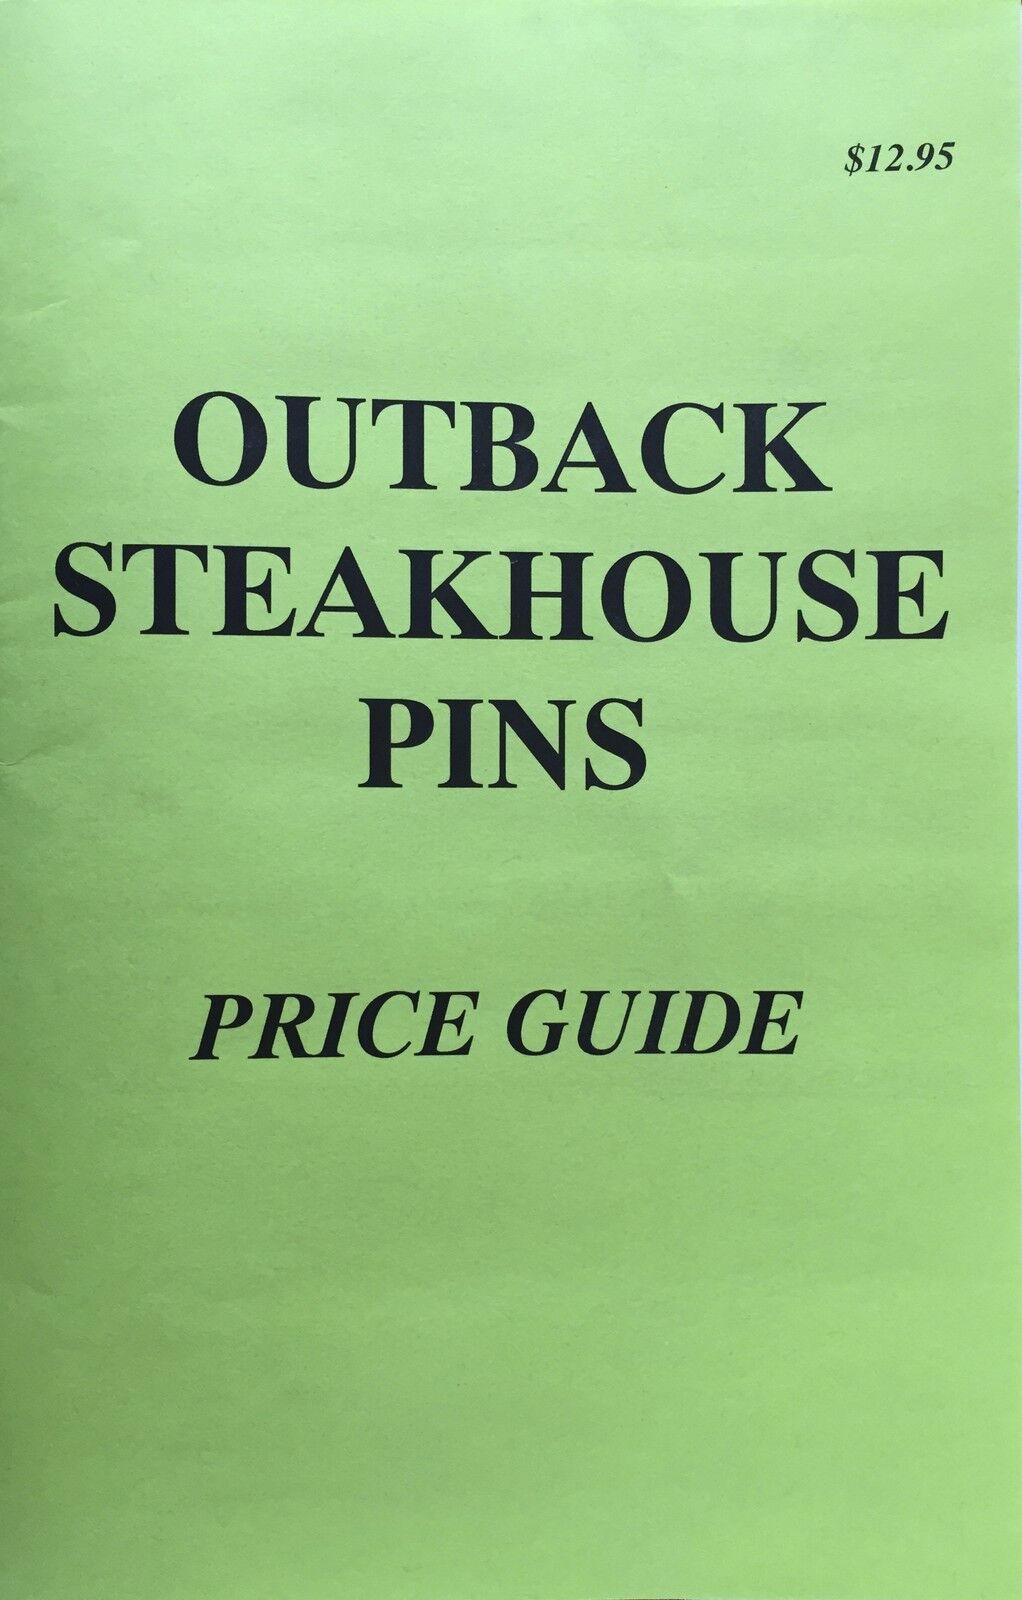 Outback Steakhouse Pins - Price Guide